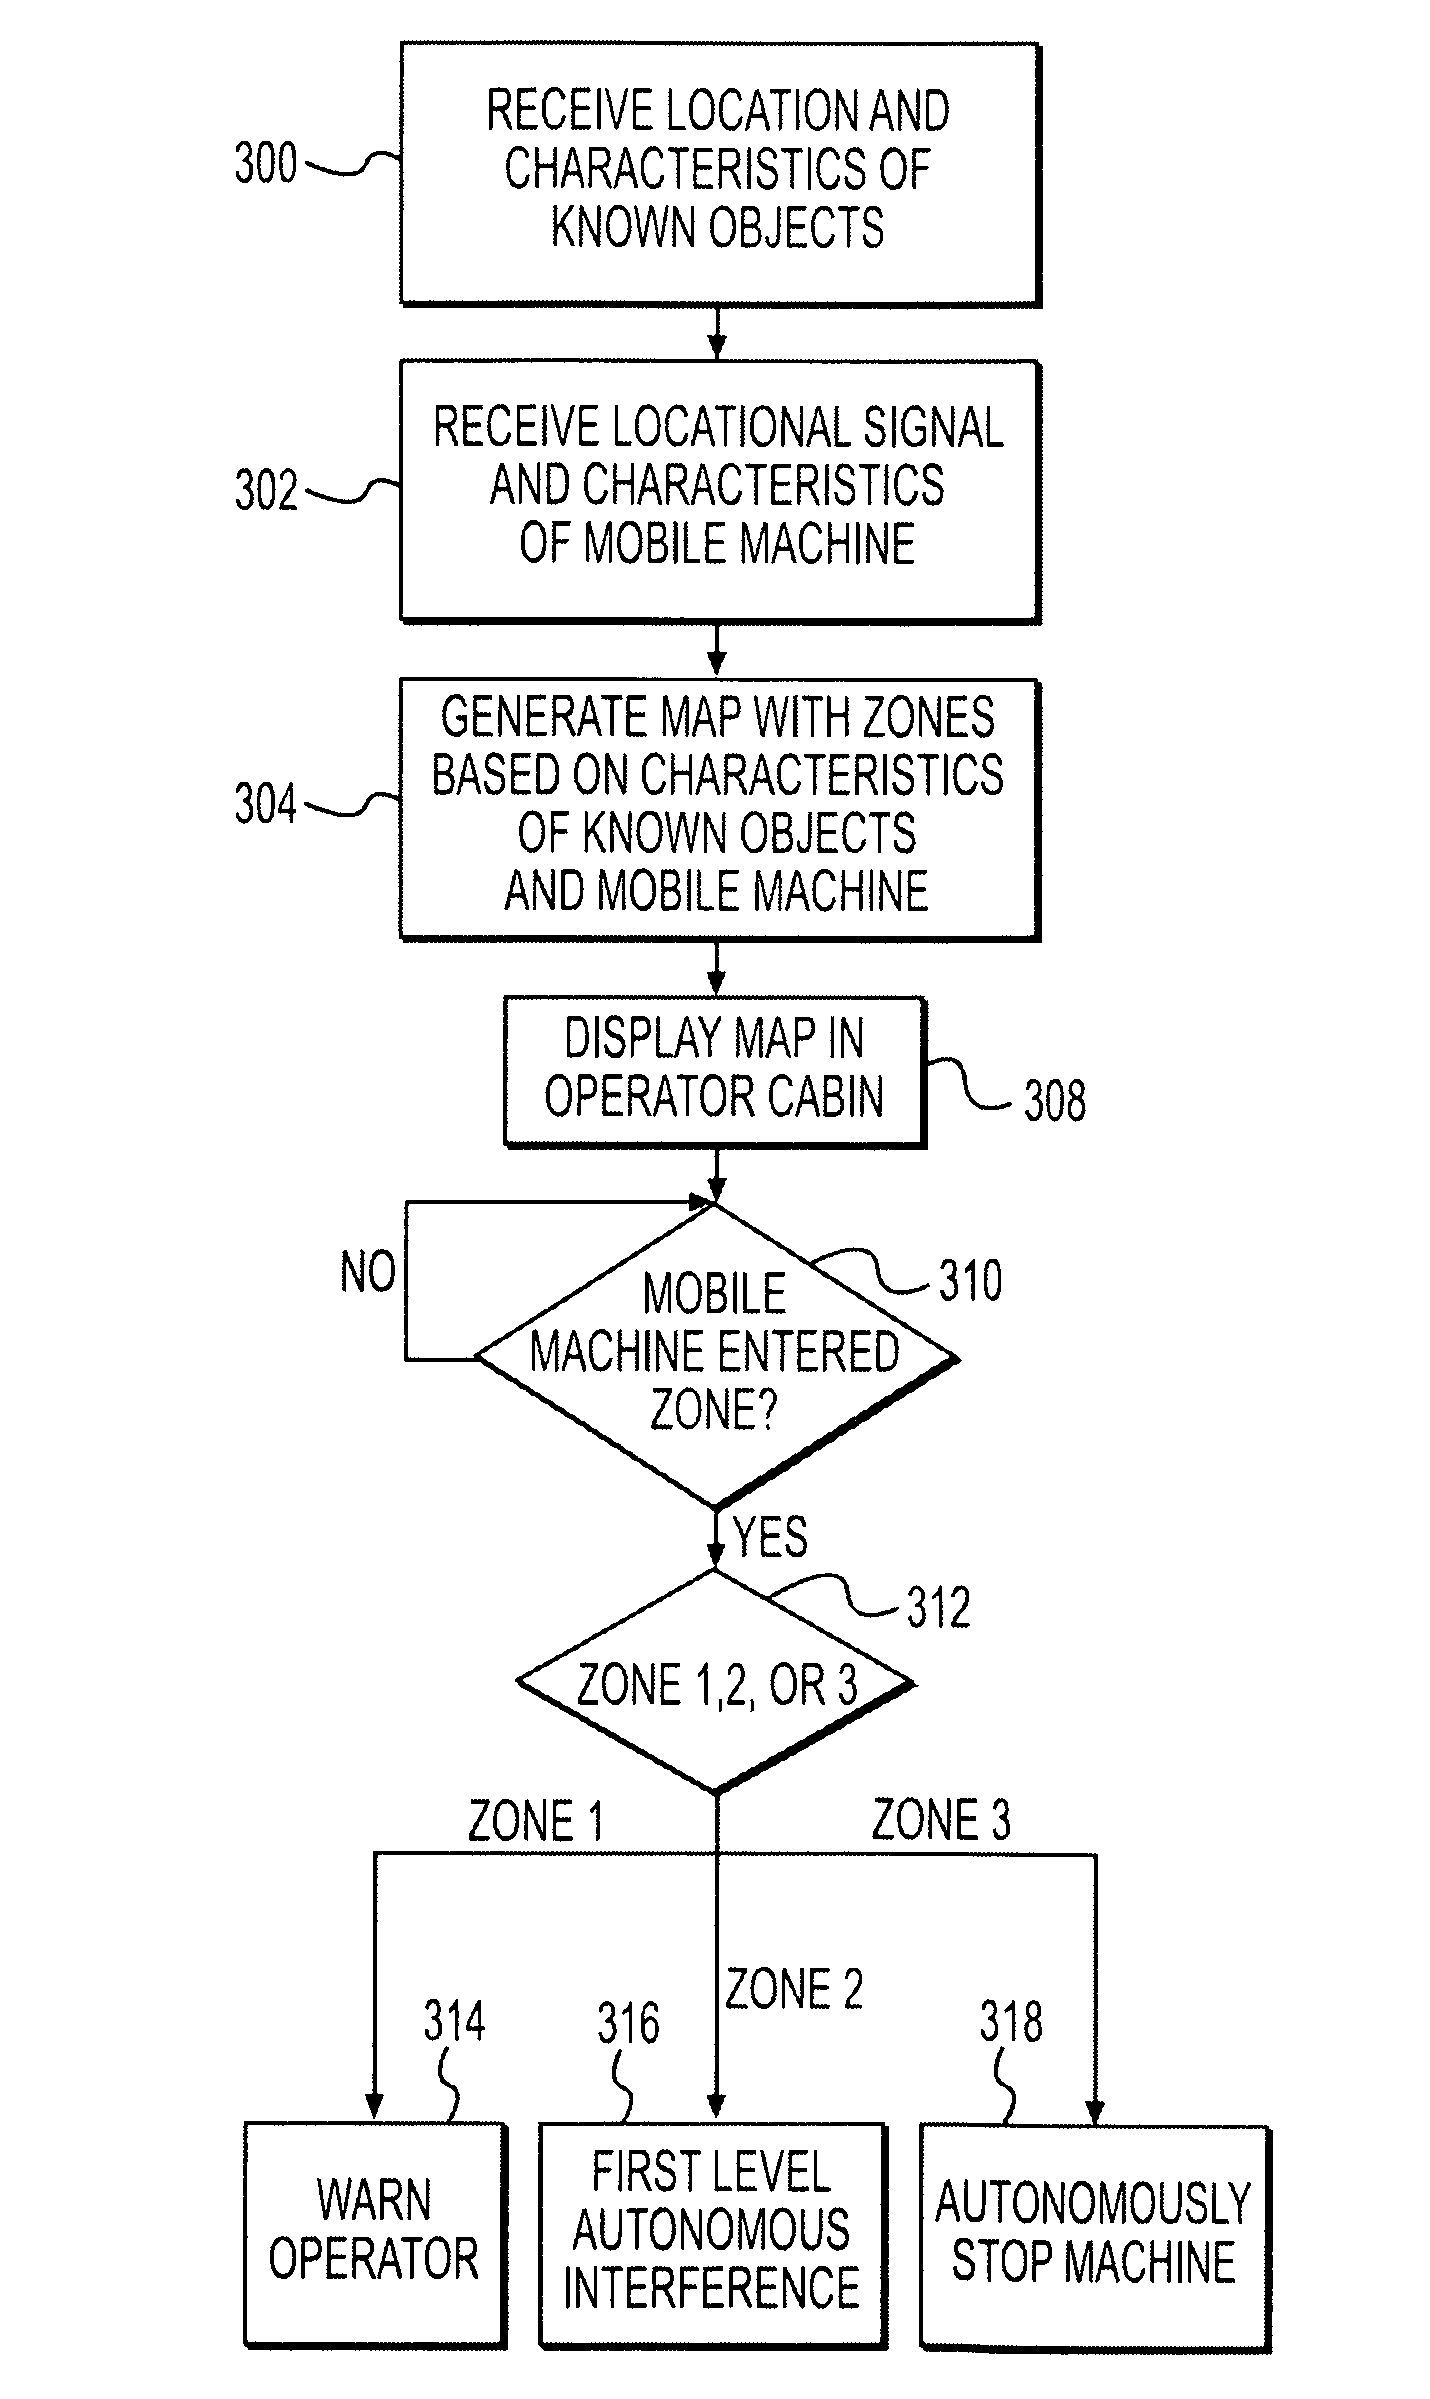 Worksite zone mapping and collision avoidance system